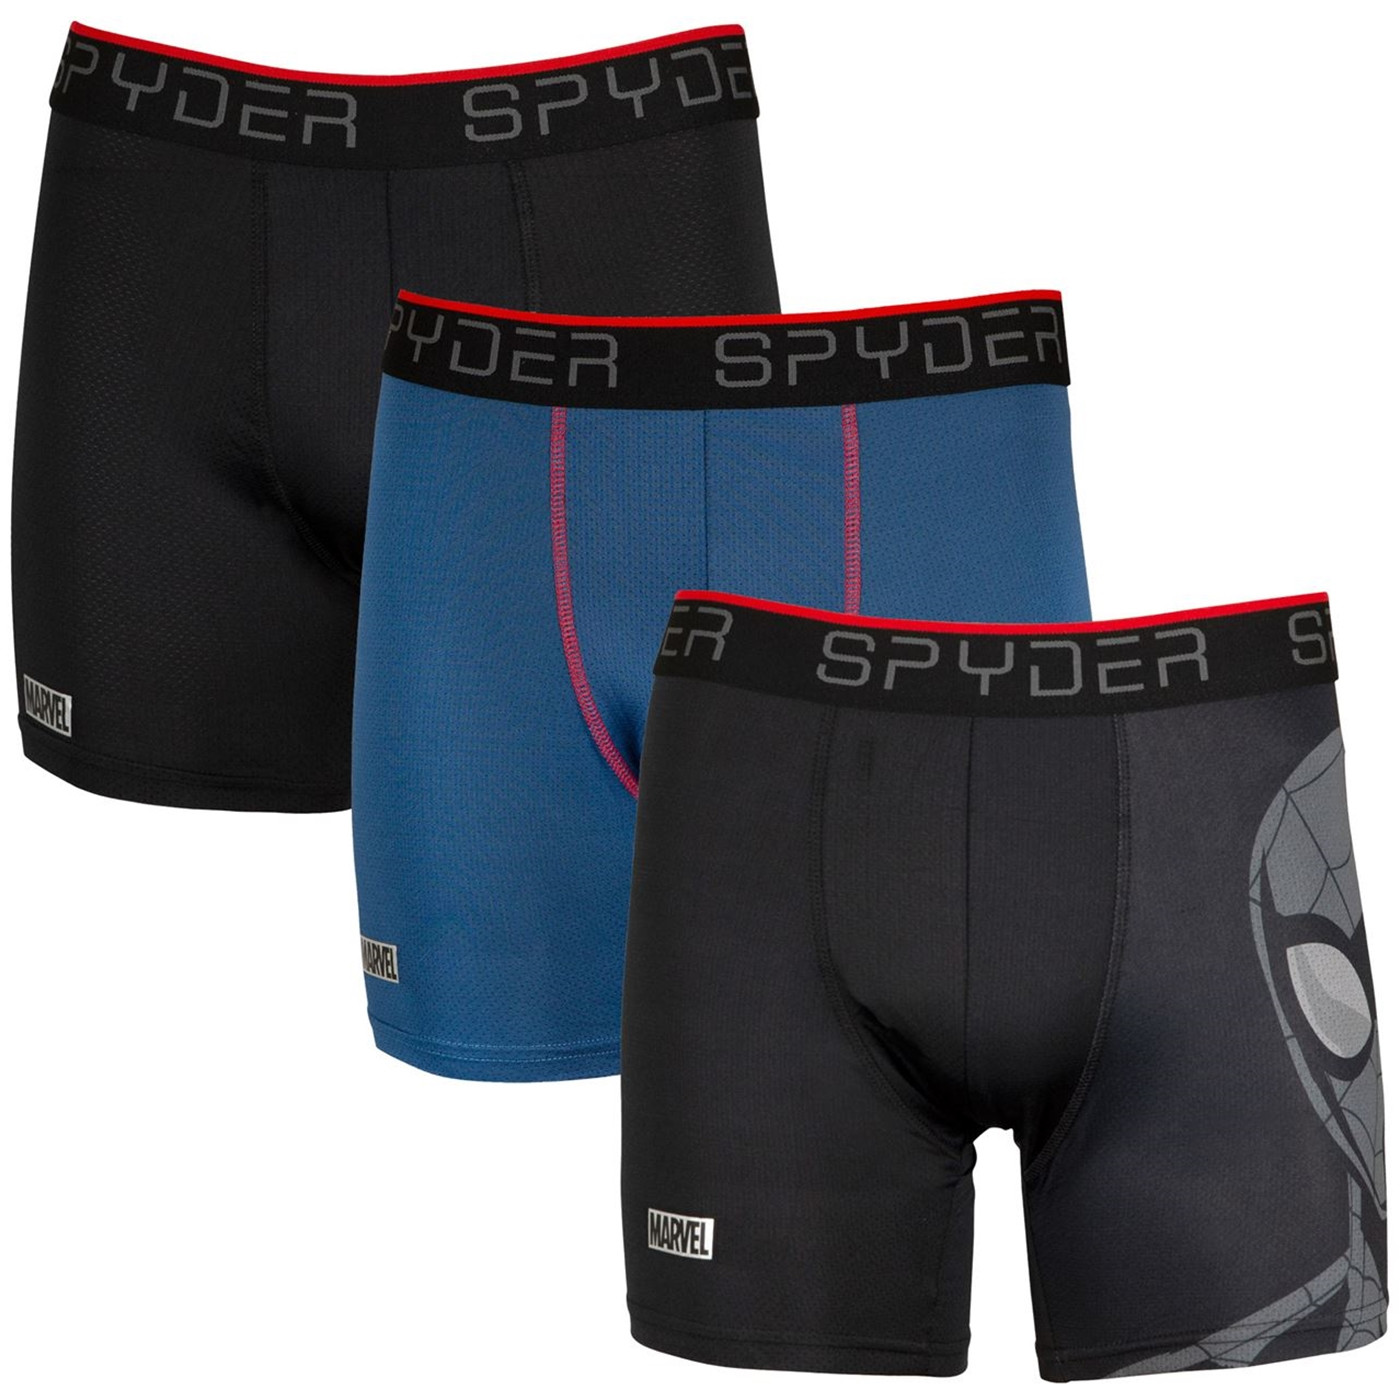 Black Panther Spyder Performance Sports Boxer Briefs 3-Pair Pack-Large  (36-38) 